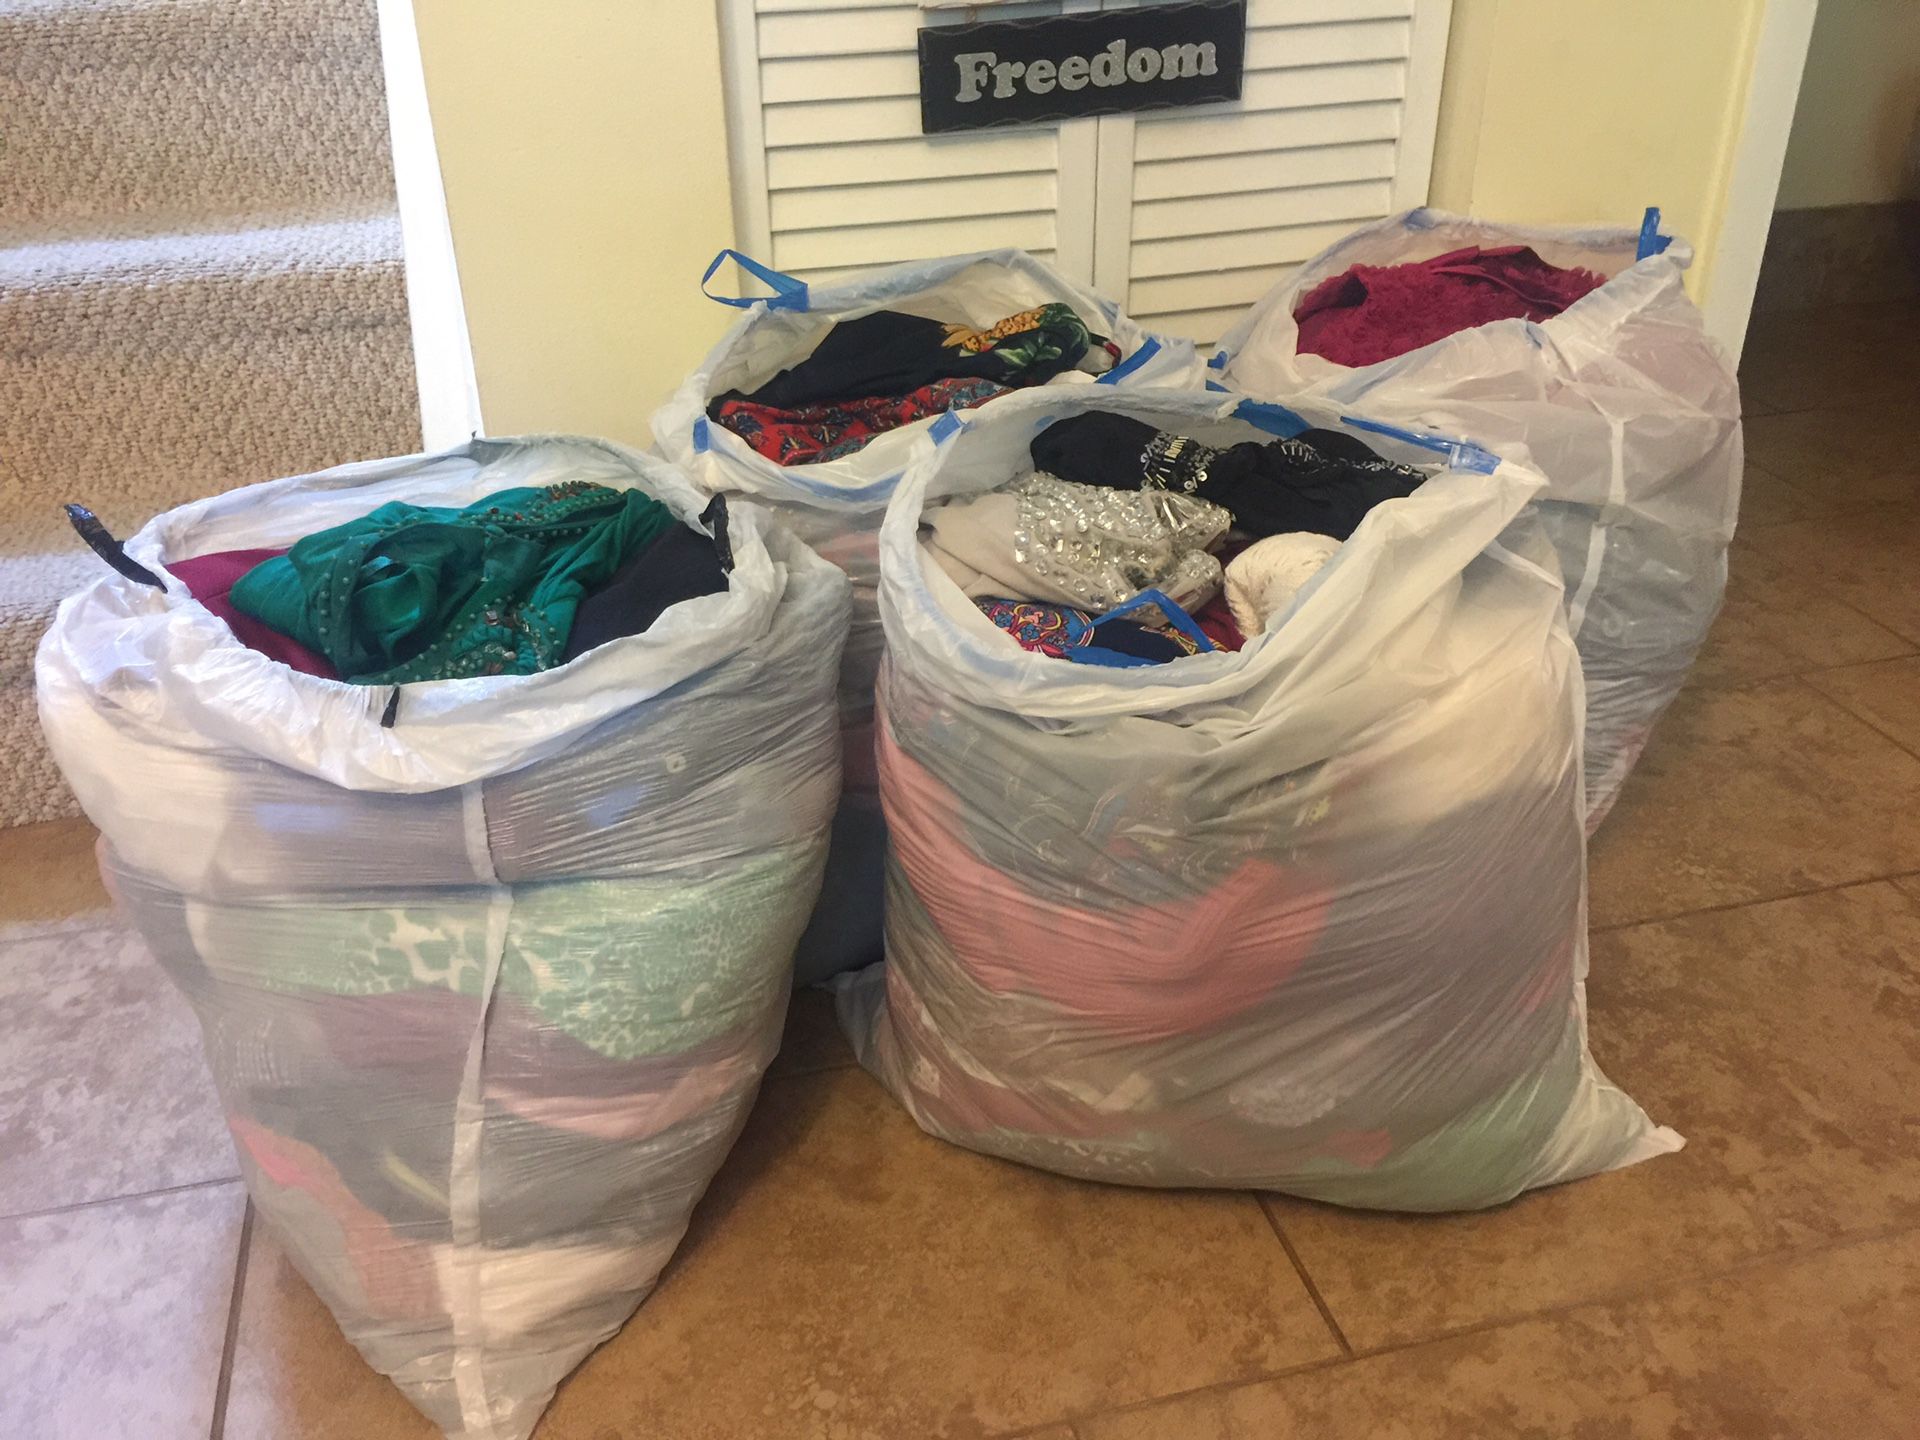 4 bags of clothes for $80